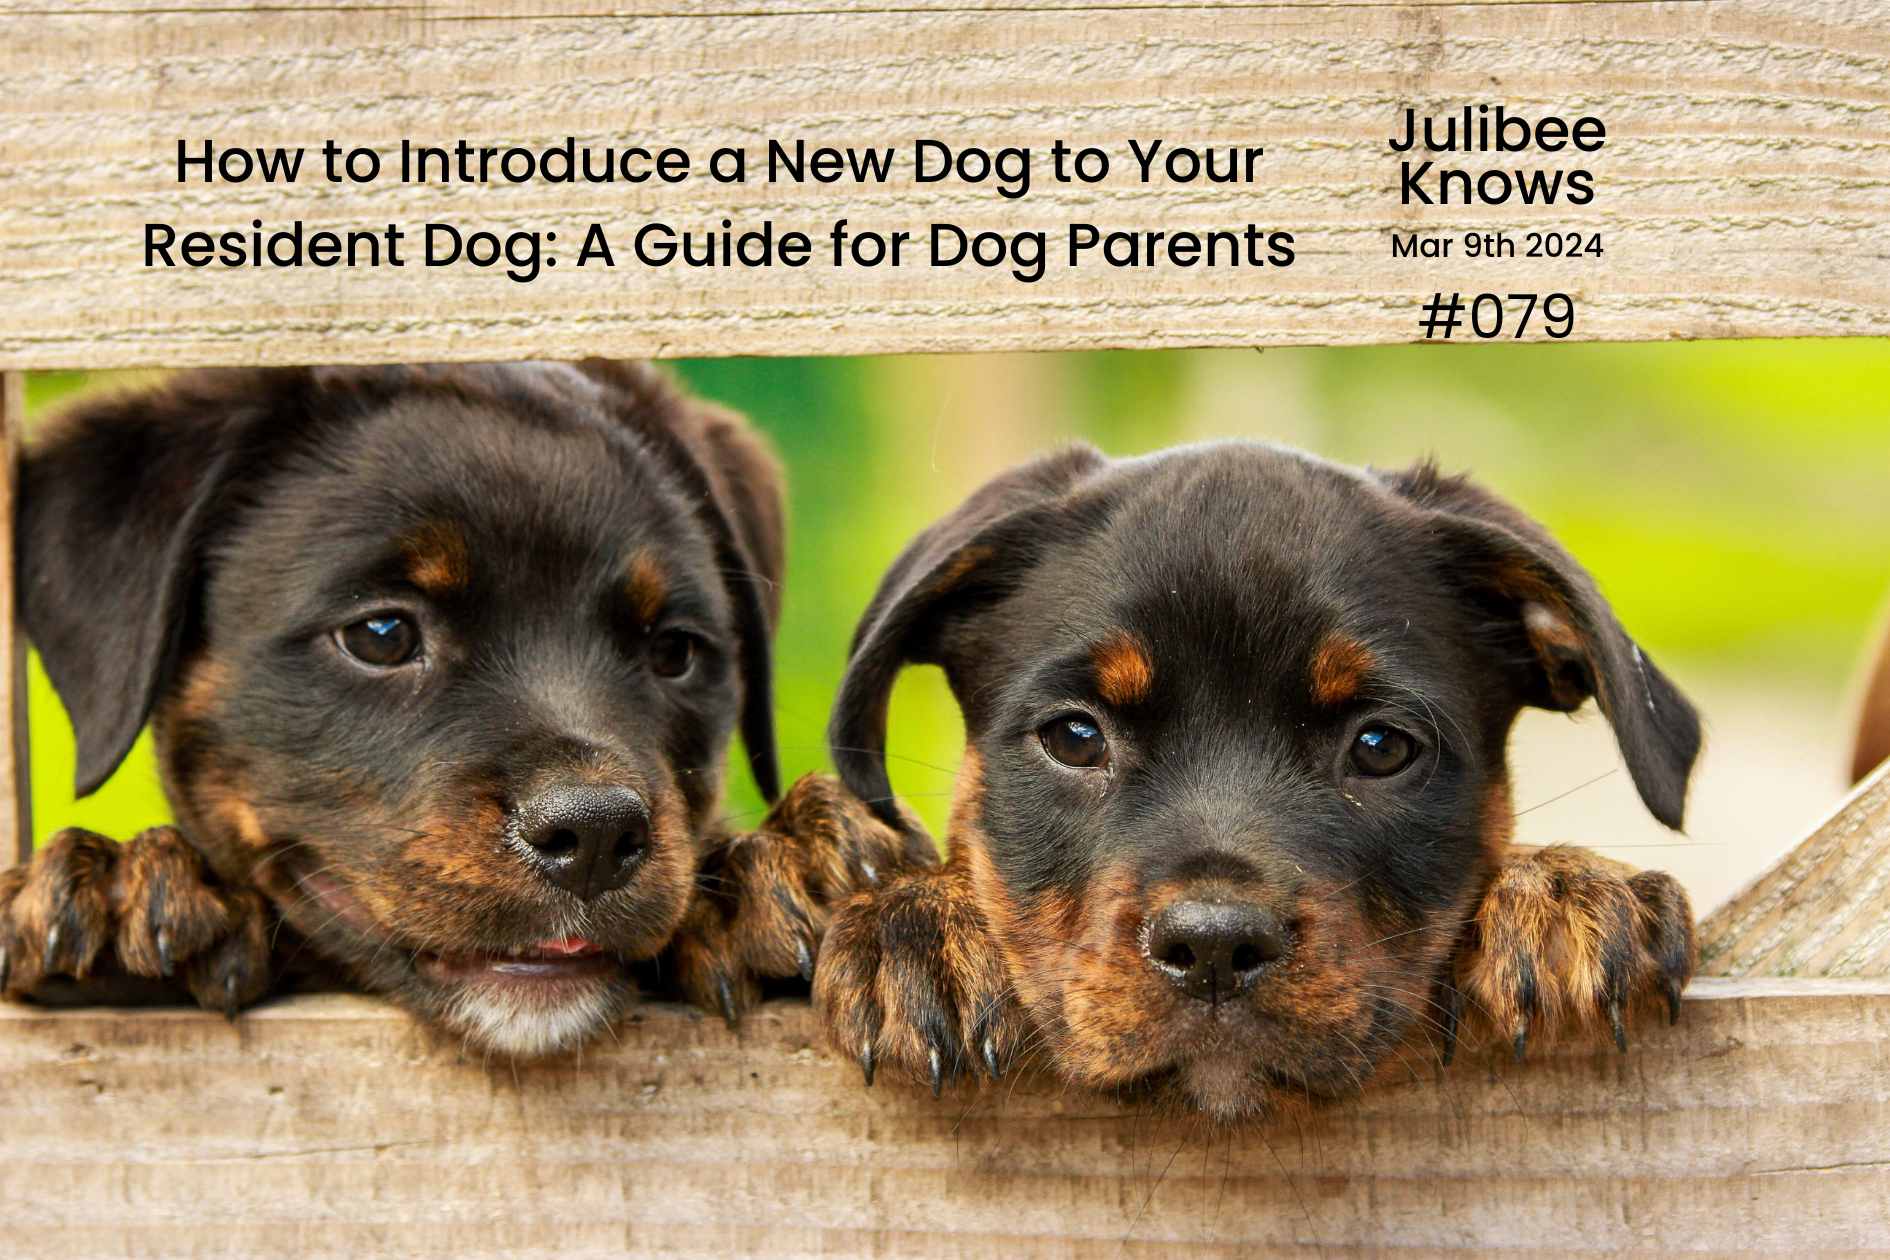 How to Introduce a New Dog to Your Resident Dog: A Guide for Dog Parents